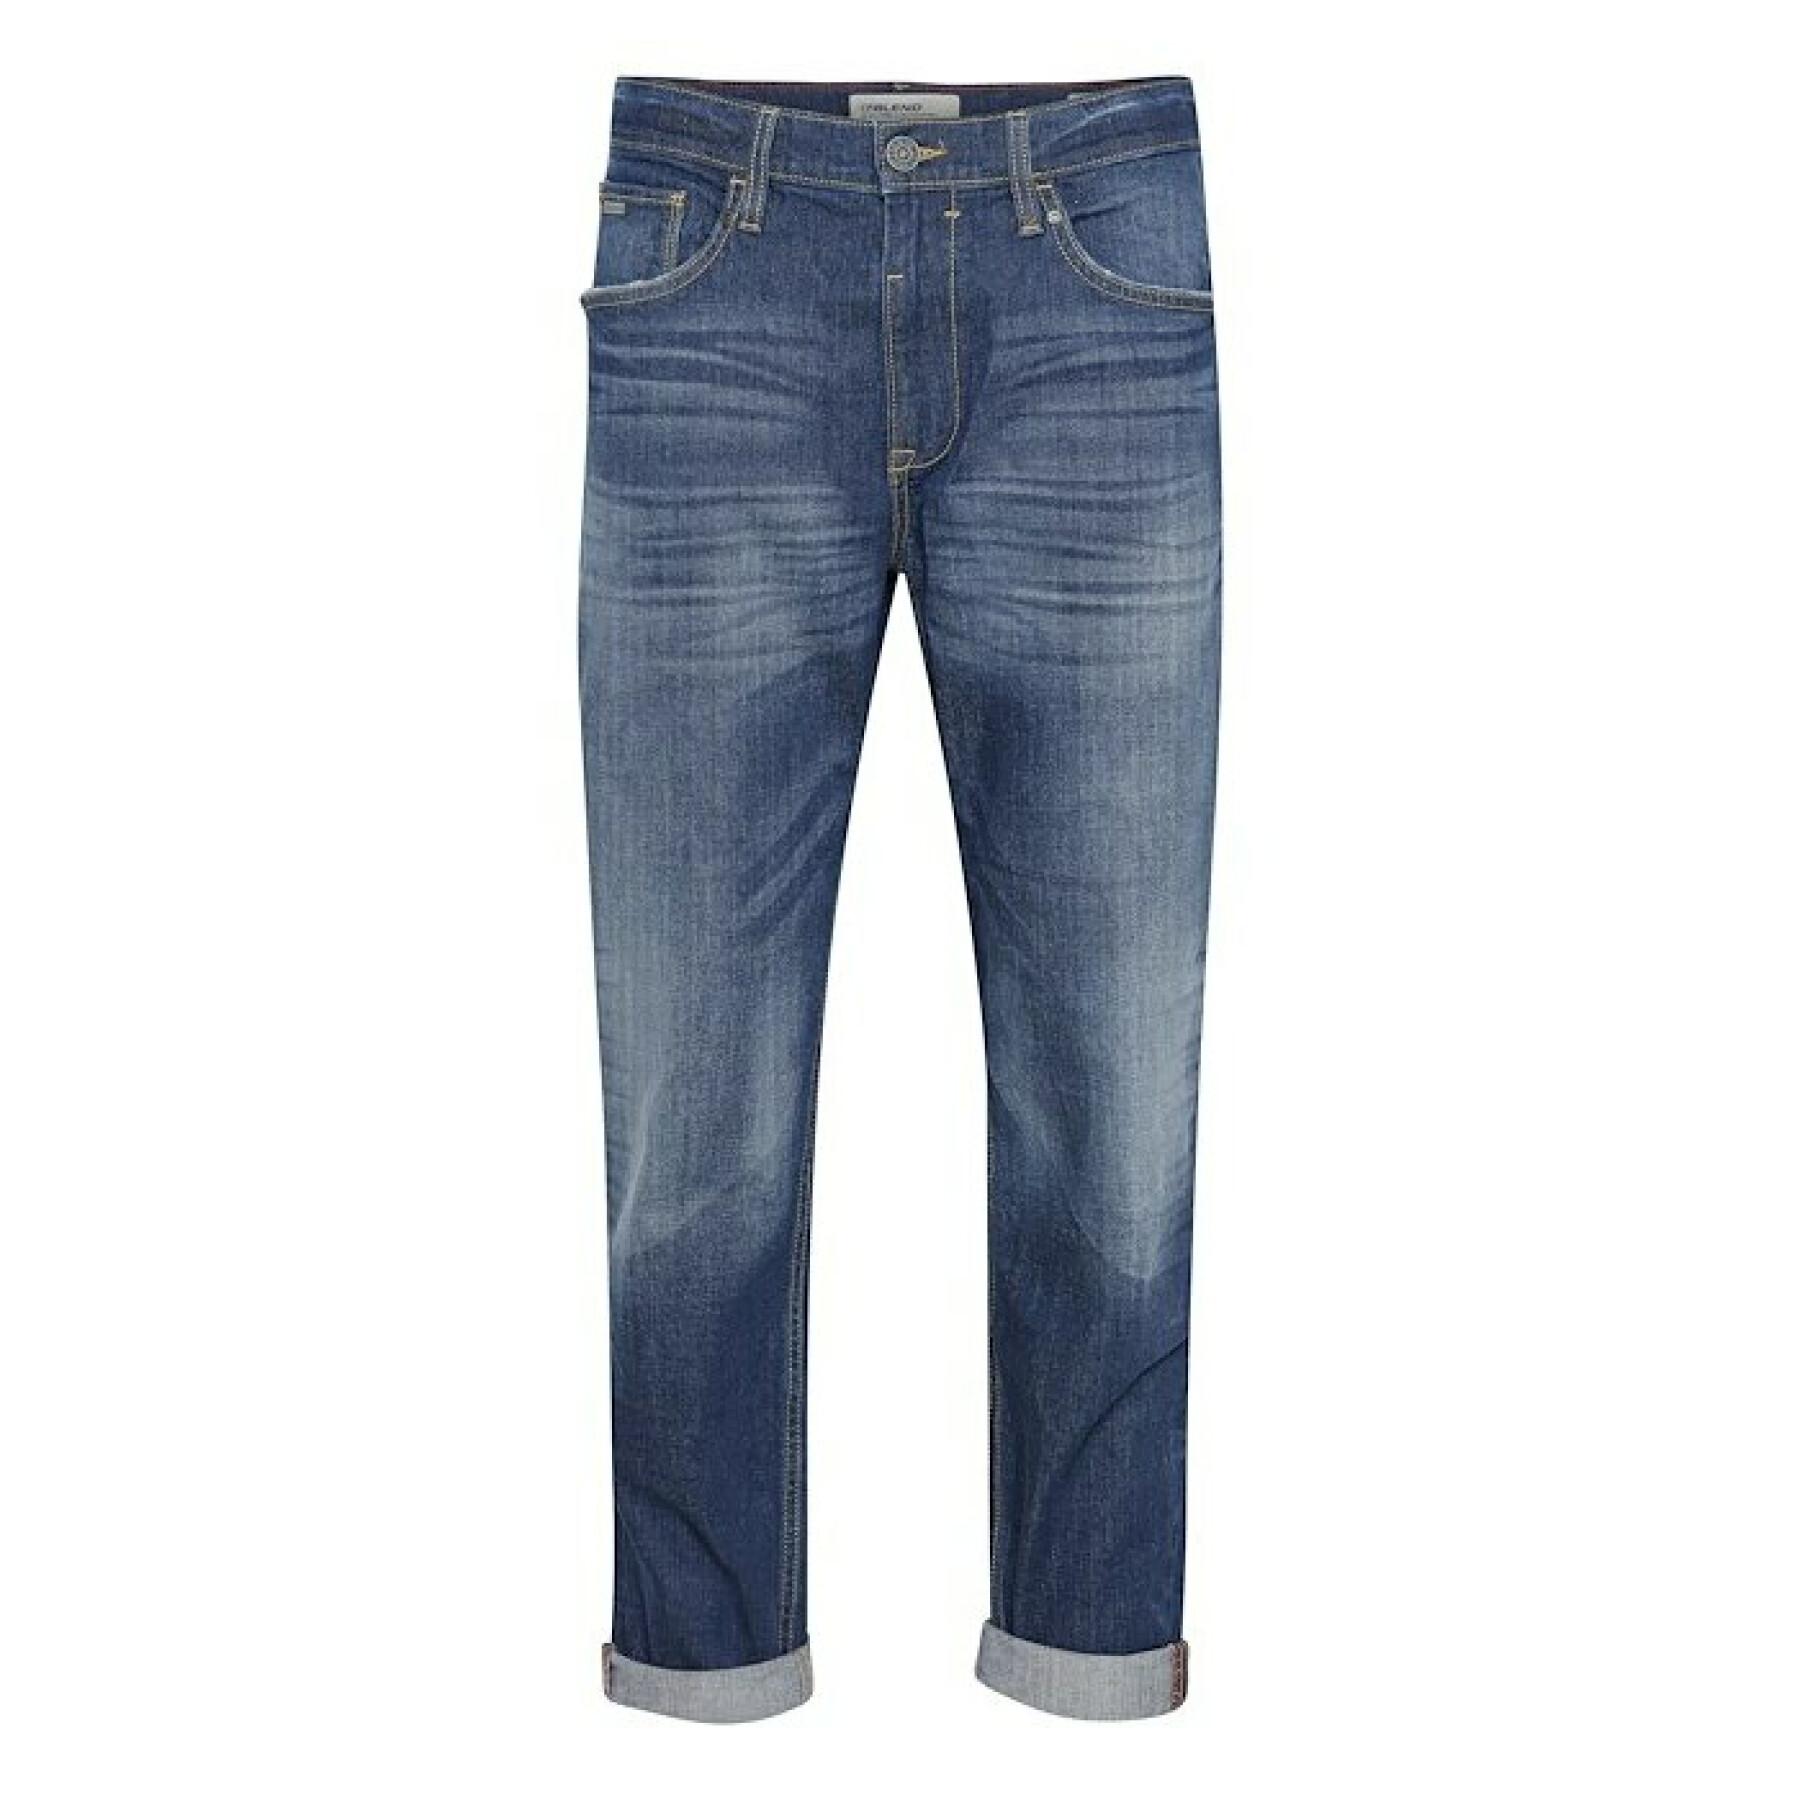 Casual jeans Blend thunder